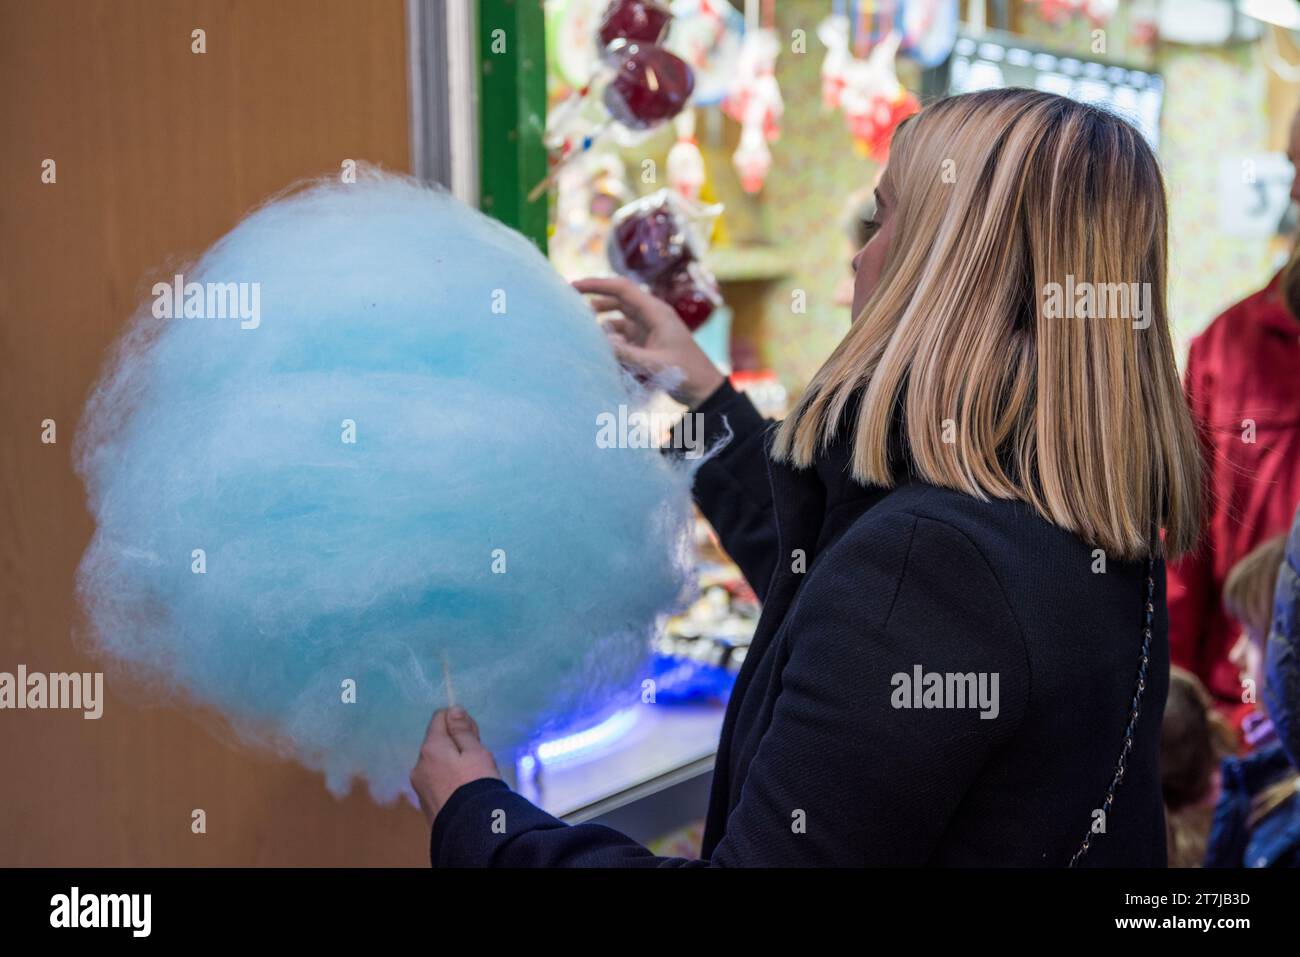 In the holiday spirit: A woman joyfully indulges in a vibrant blue cotton candy at Barcelona's Christmas Fair, adding a touch of sweet magic to the fe Stock Photo